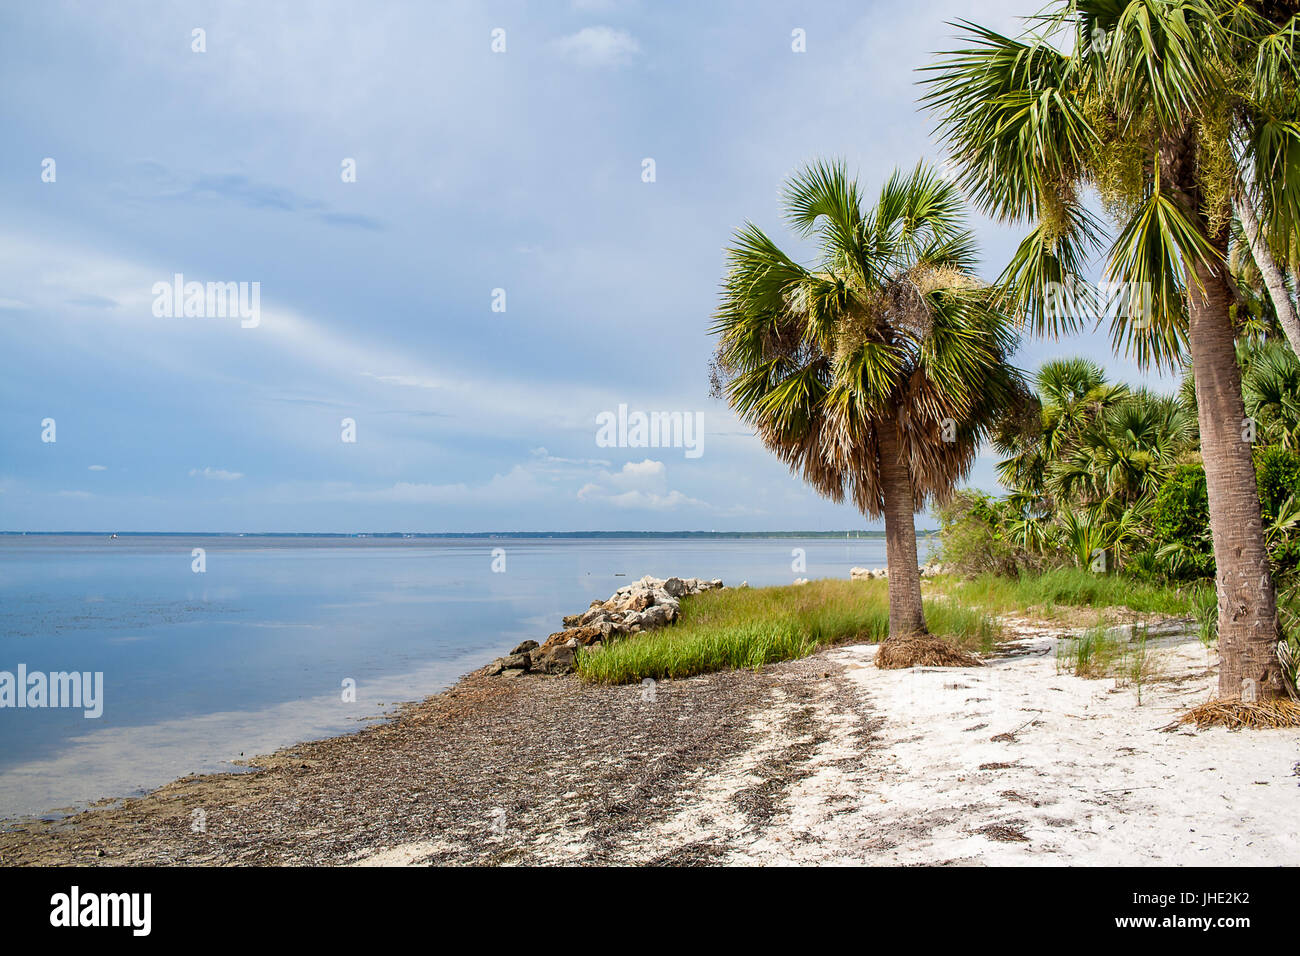 The shore of a calm bay with palm tress Stock Photo